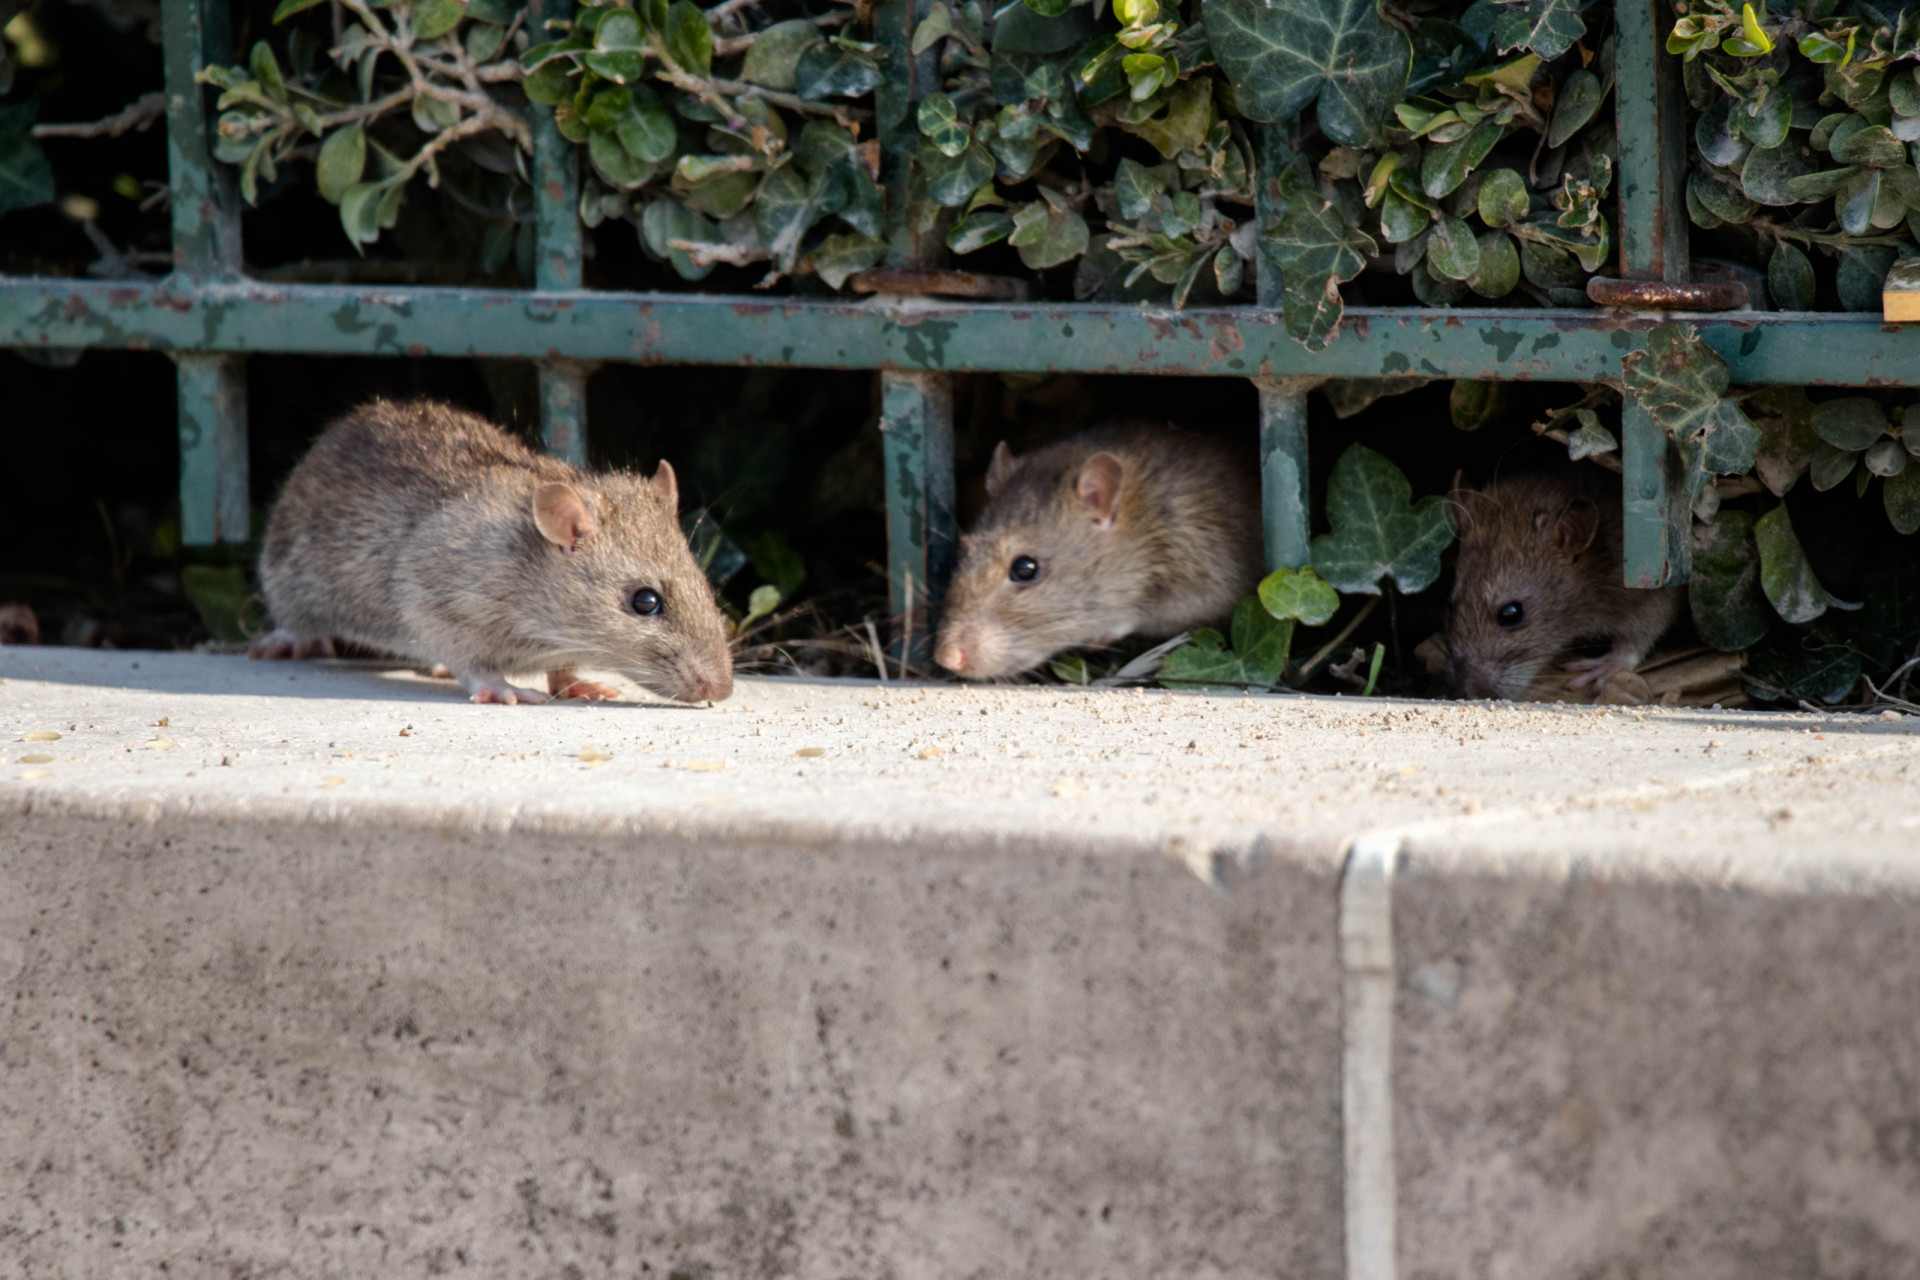 <p>Just like in every densely populated city, Paris also deals with rats, trash, pickpockets, and various unpleasant aromas. All of which are terribly unromantic.</p><p><a href="https://www.msn.com/en-us/community/channel/vid-7xx8mnucu55yw63we9va2gwr7uihbxwc68fxqp25x6tg4ftibpra?cvid=94631541bc0f4f89bfd59158d696ad7e">Follow us and access great exclusive content every day</a></p>